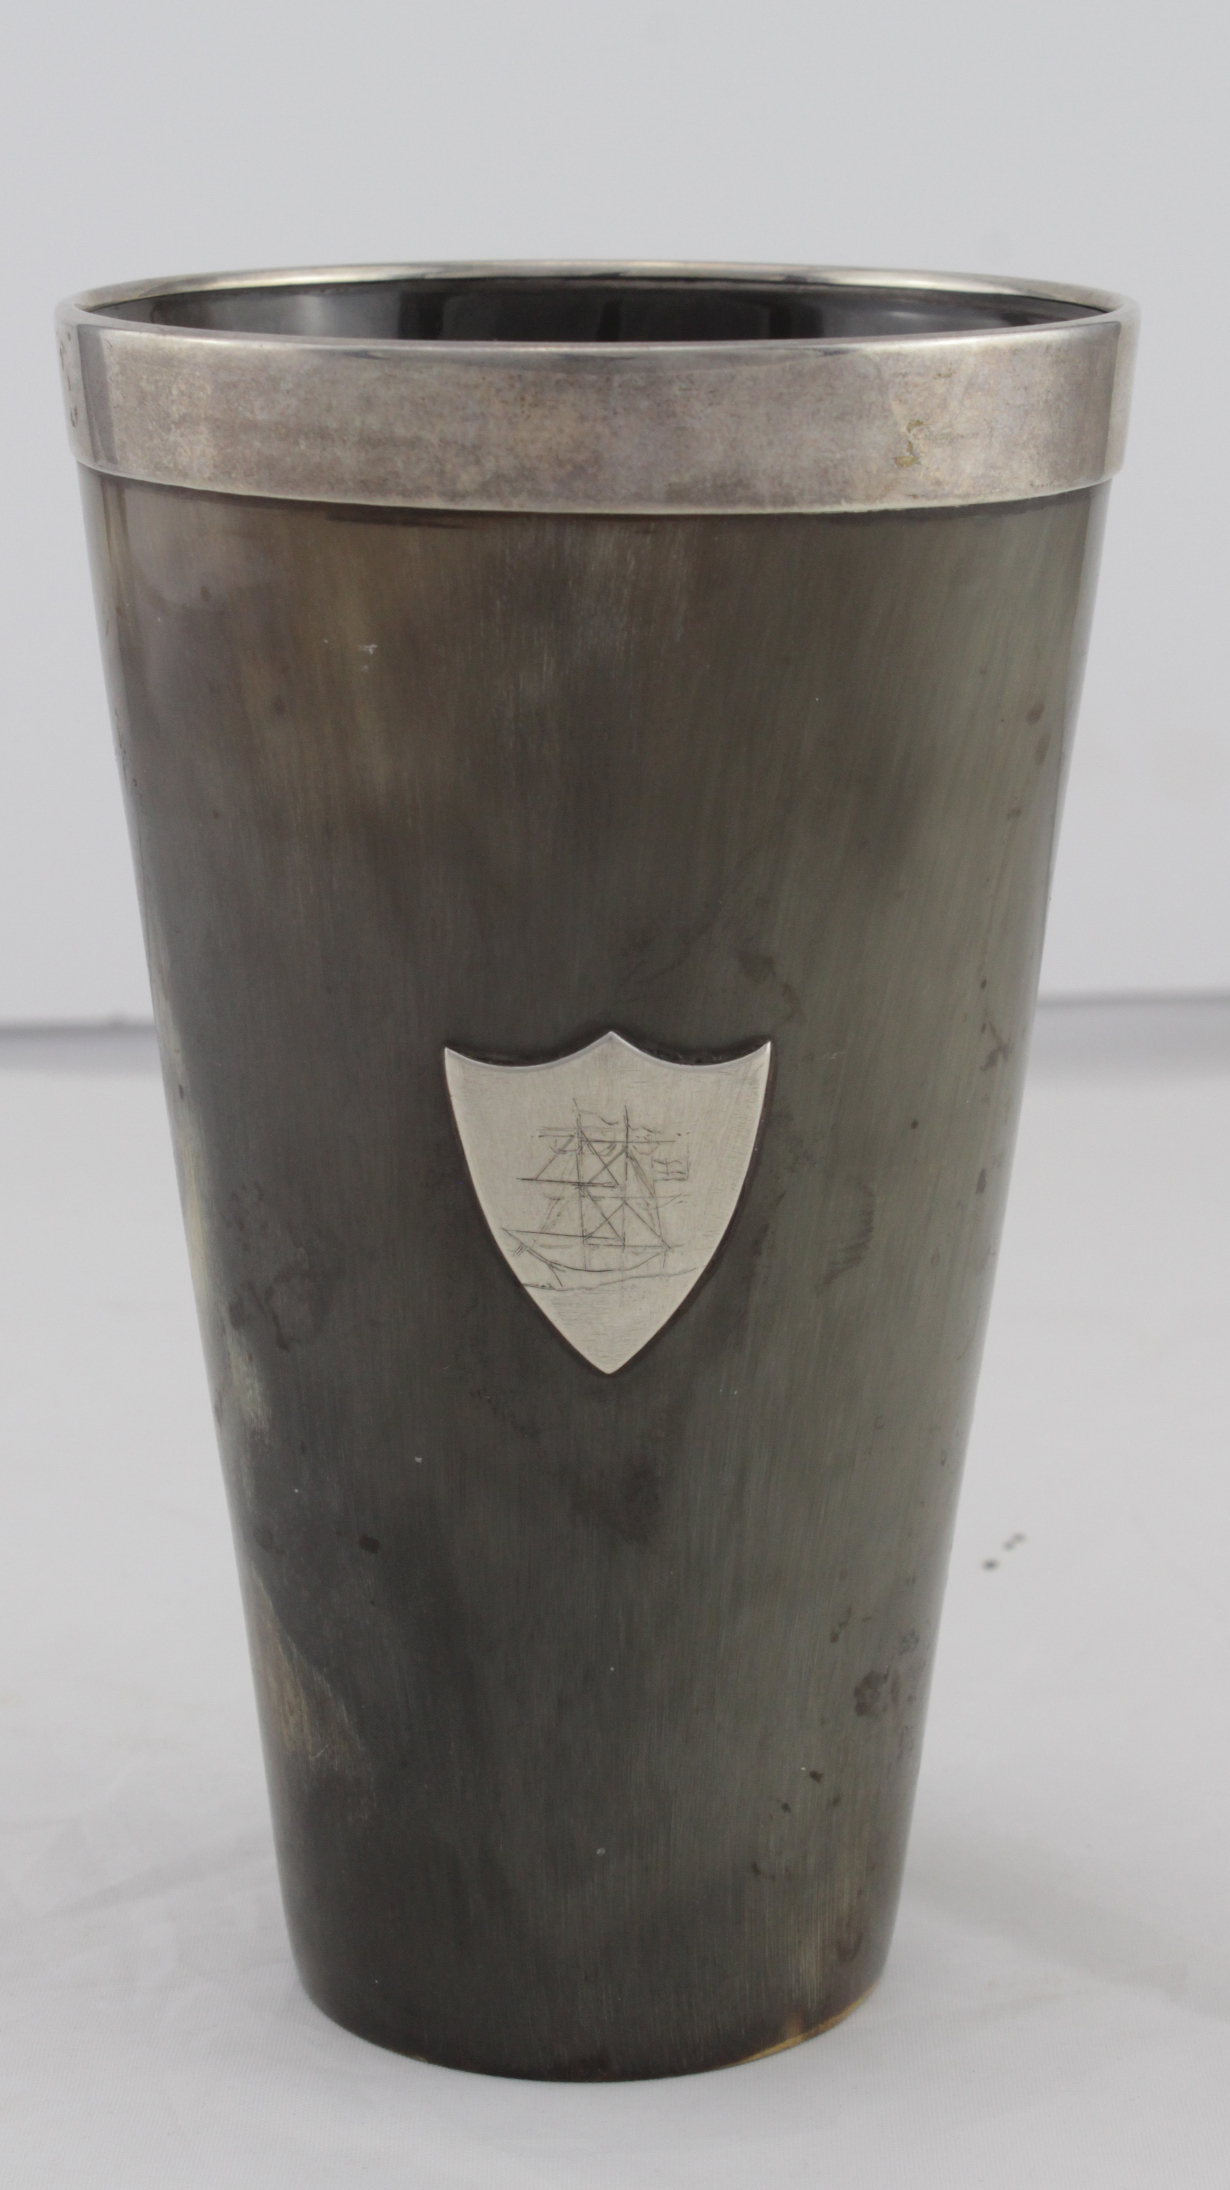 Horn beaker with silver rim and silver shield to side depicting a tall ship, hallmarked 'London